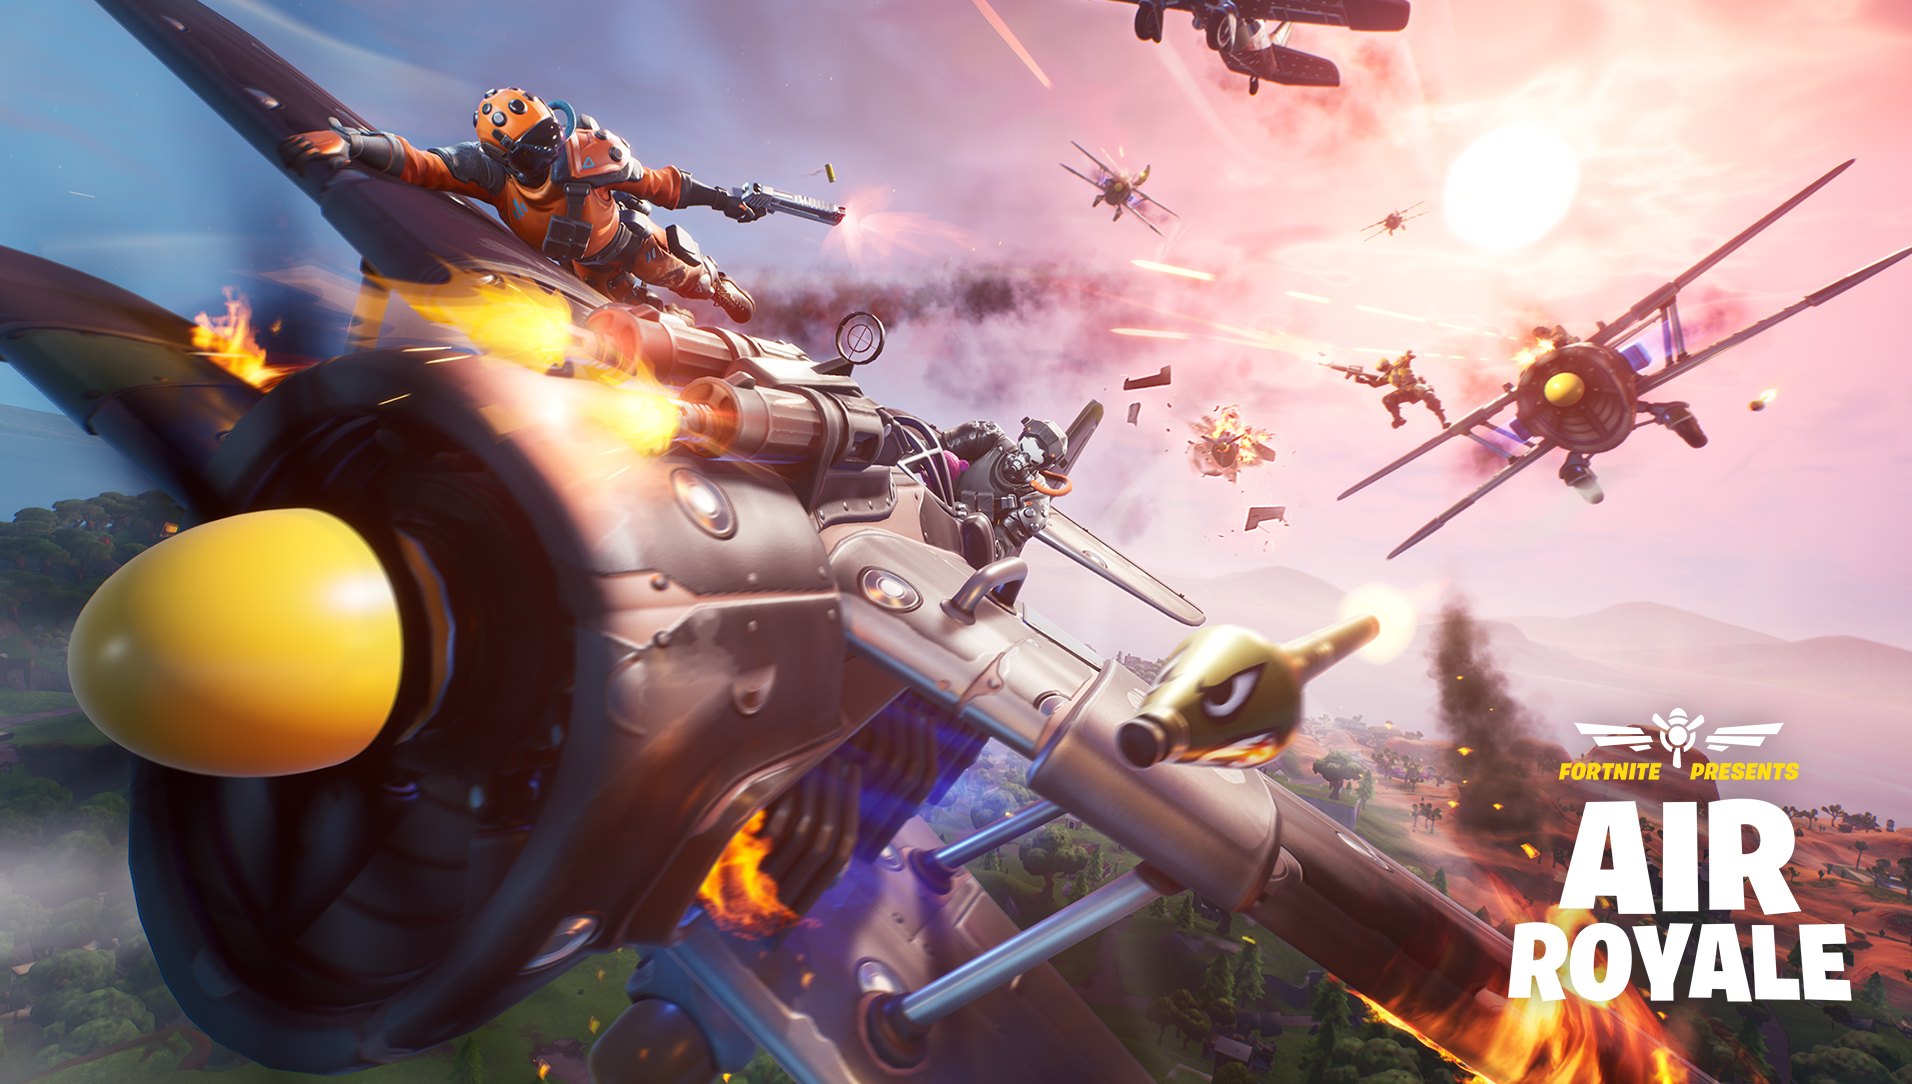 Fortnite For Xbox One Xbox - fortnite presents air royale propeller plane being piloted with an additional character hanging off the